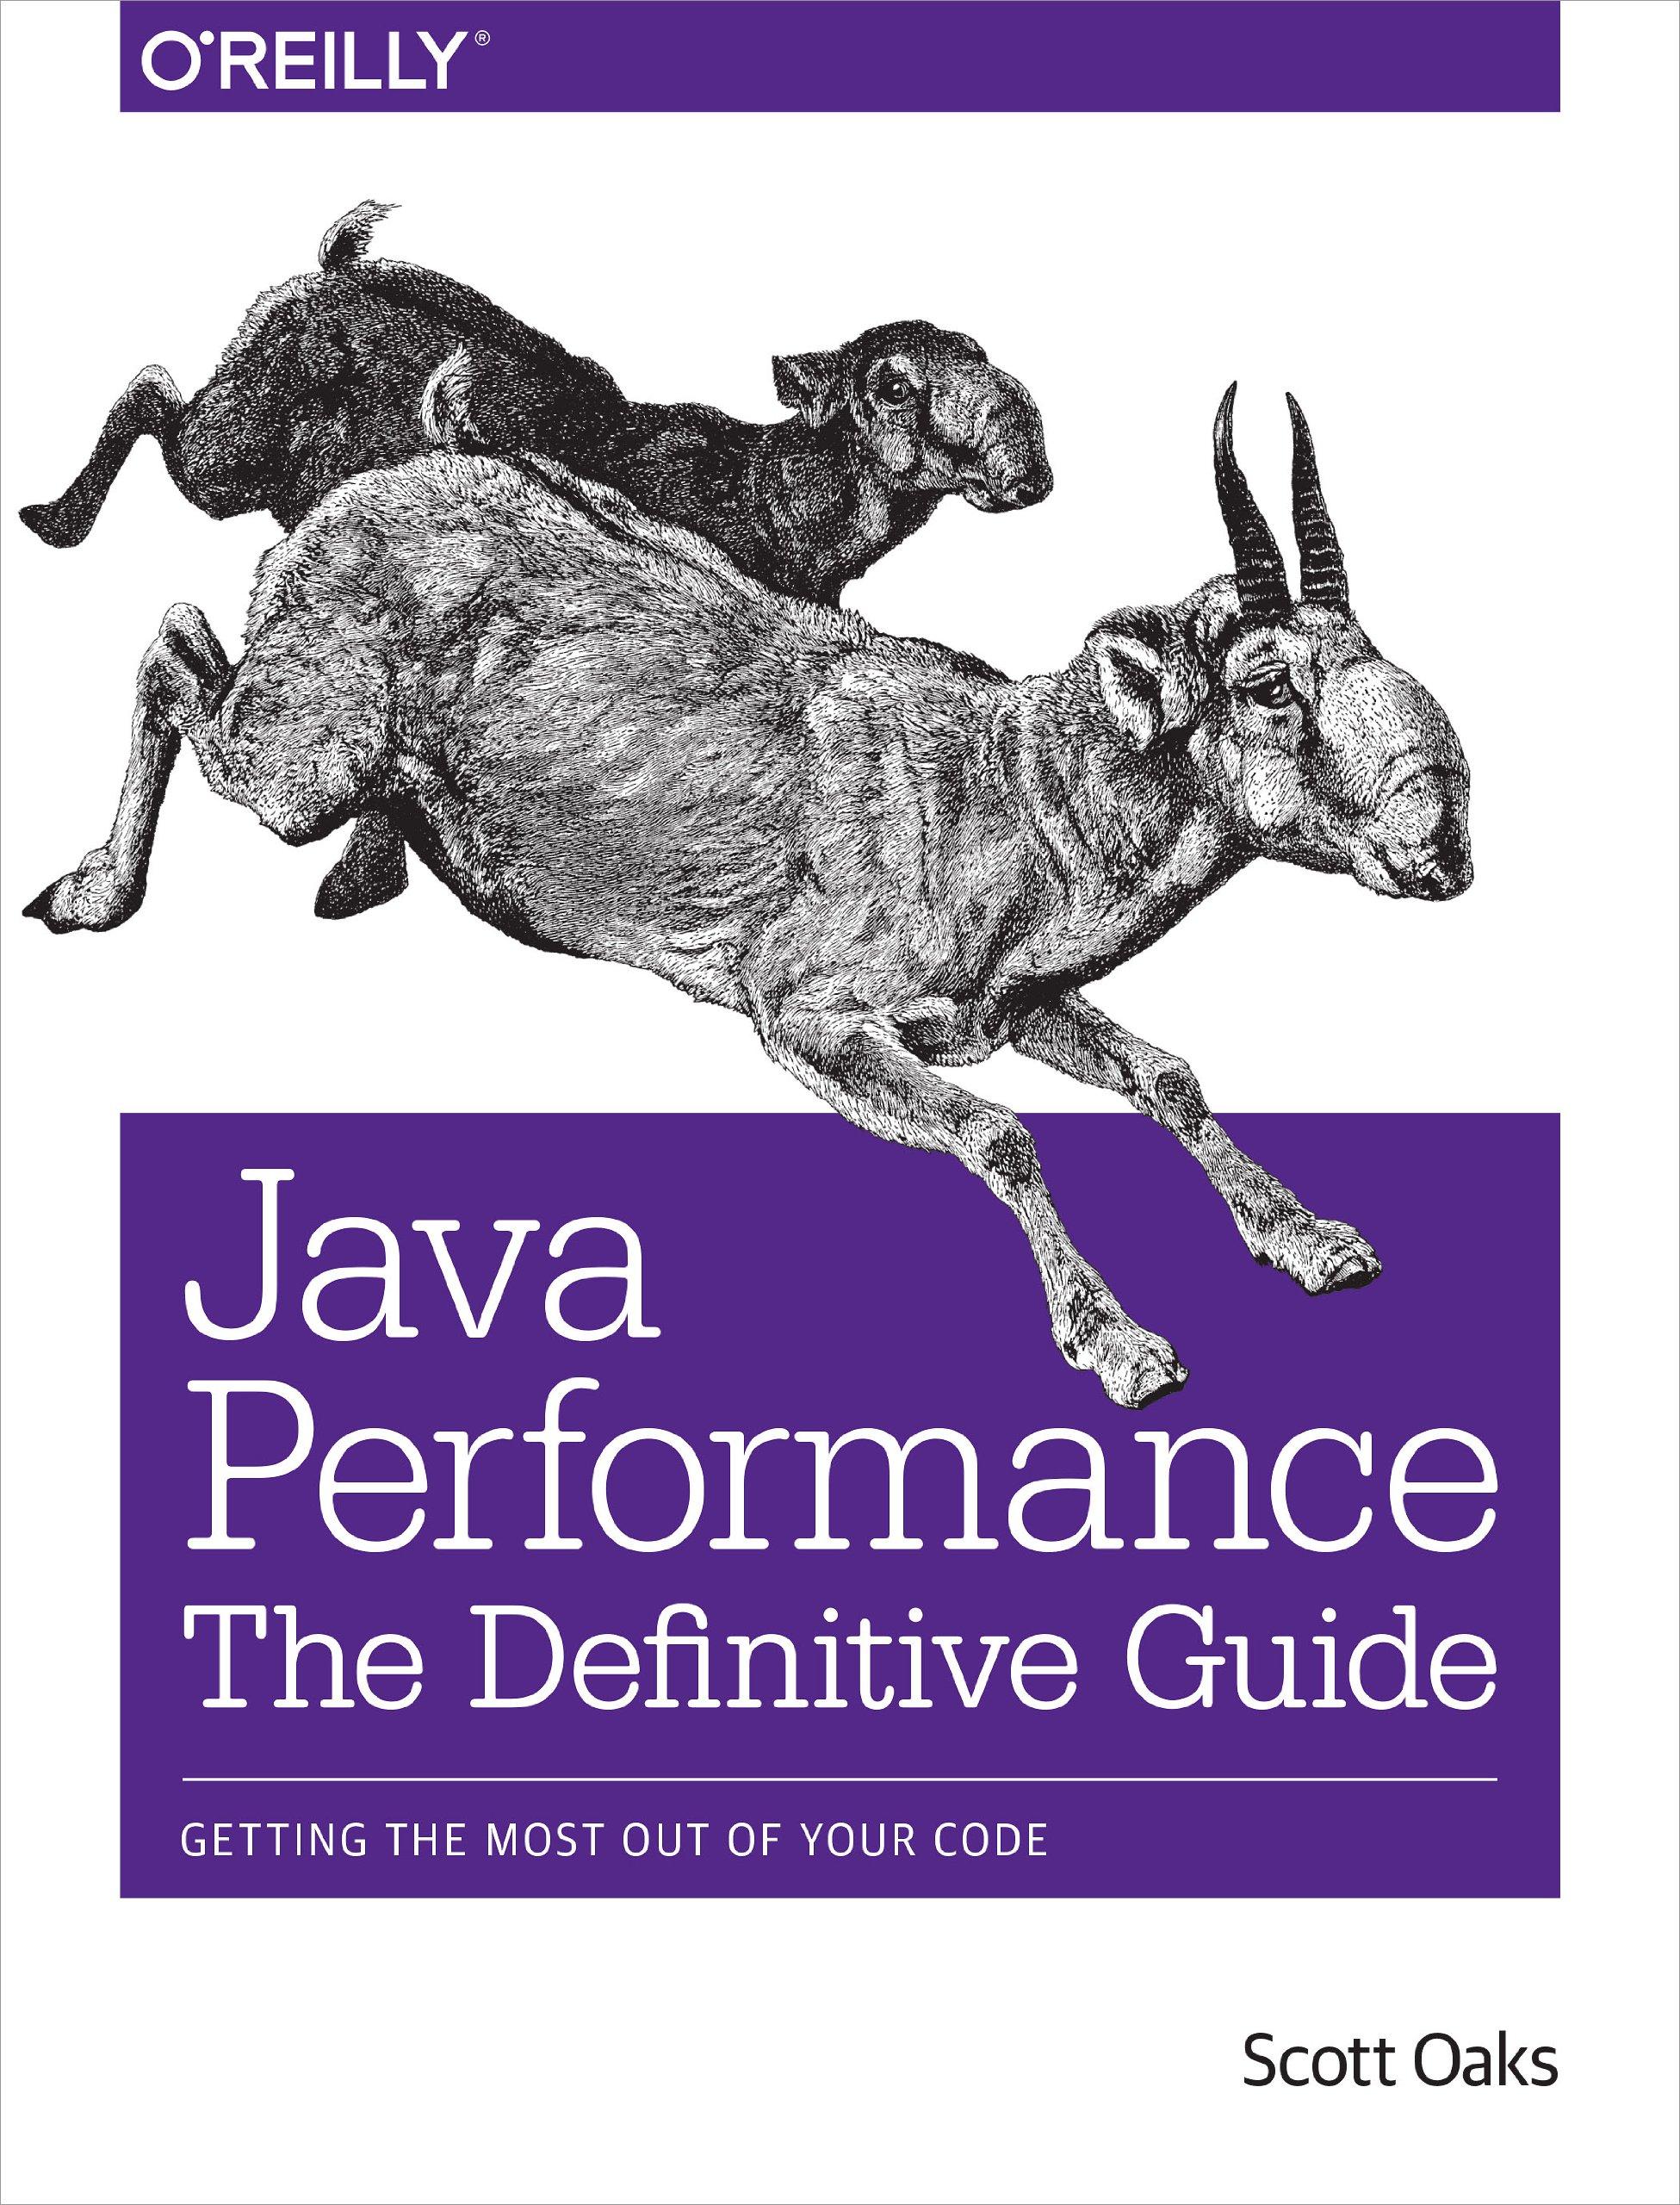 java performance the definitive guide getting the most out of your code 1st edition scott oaks 1449358454,